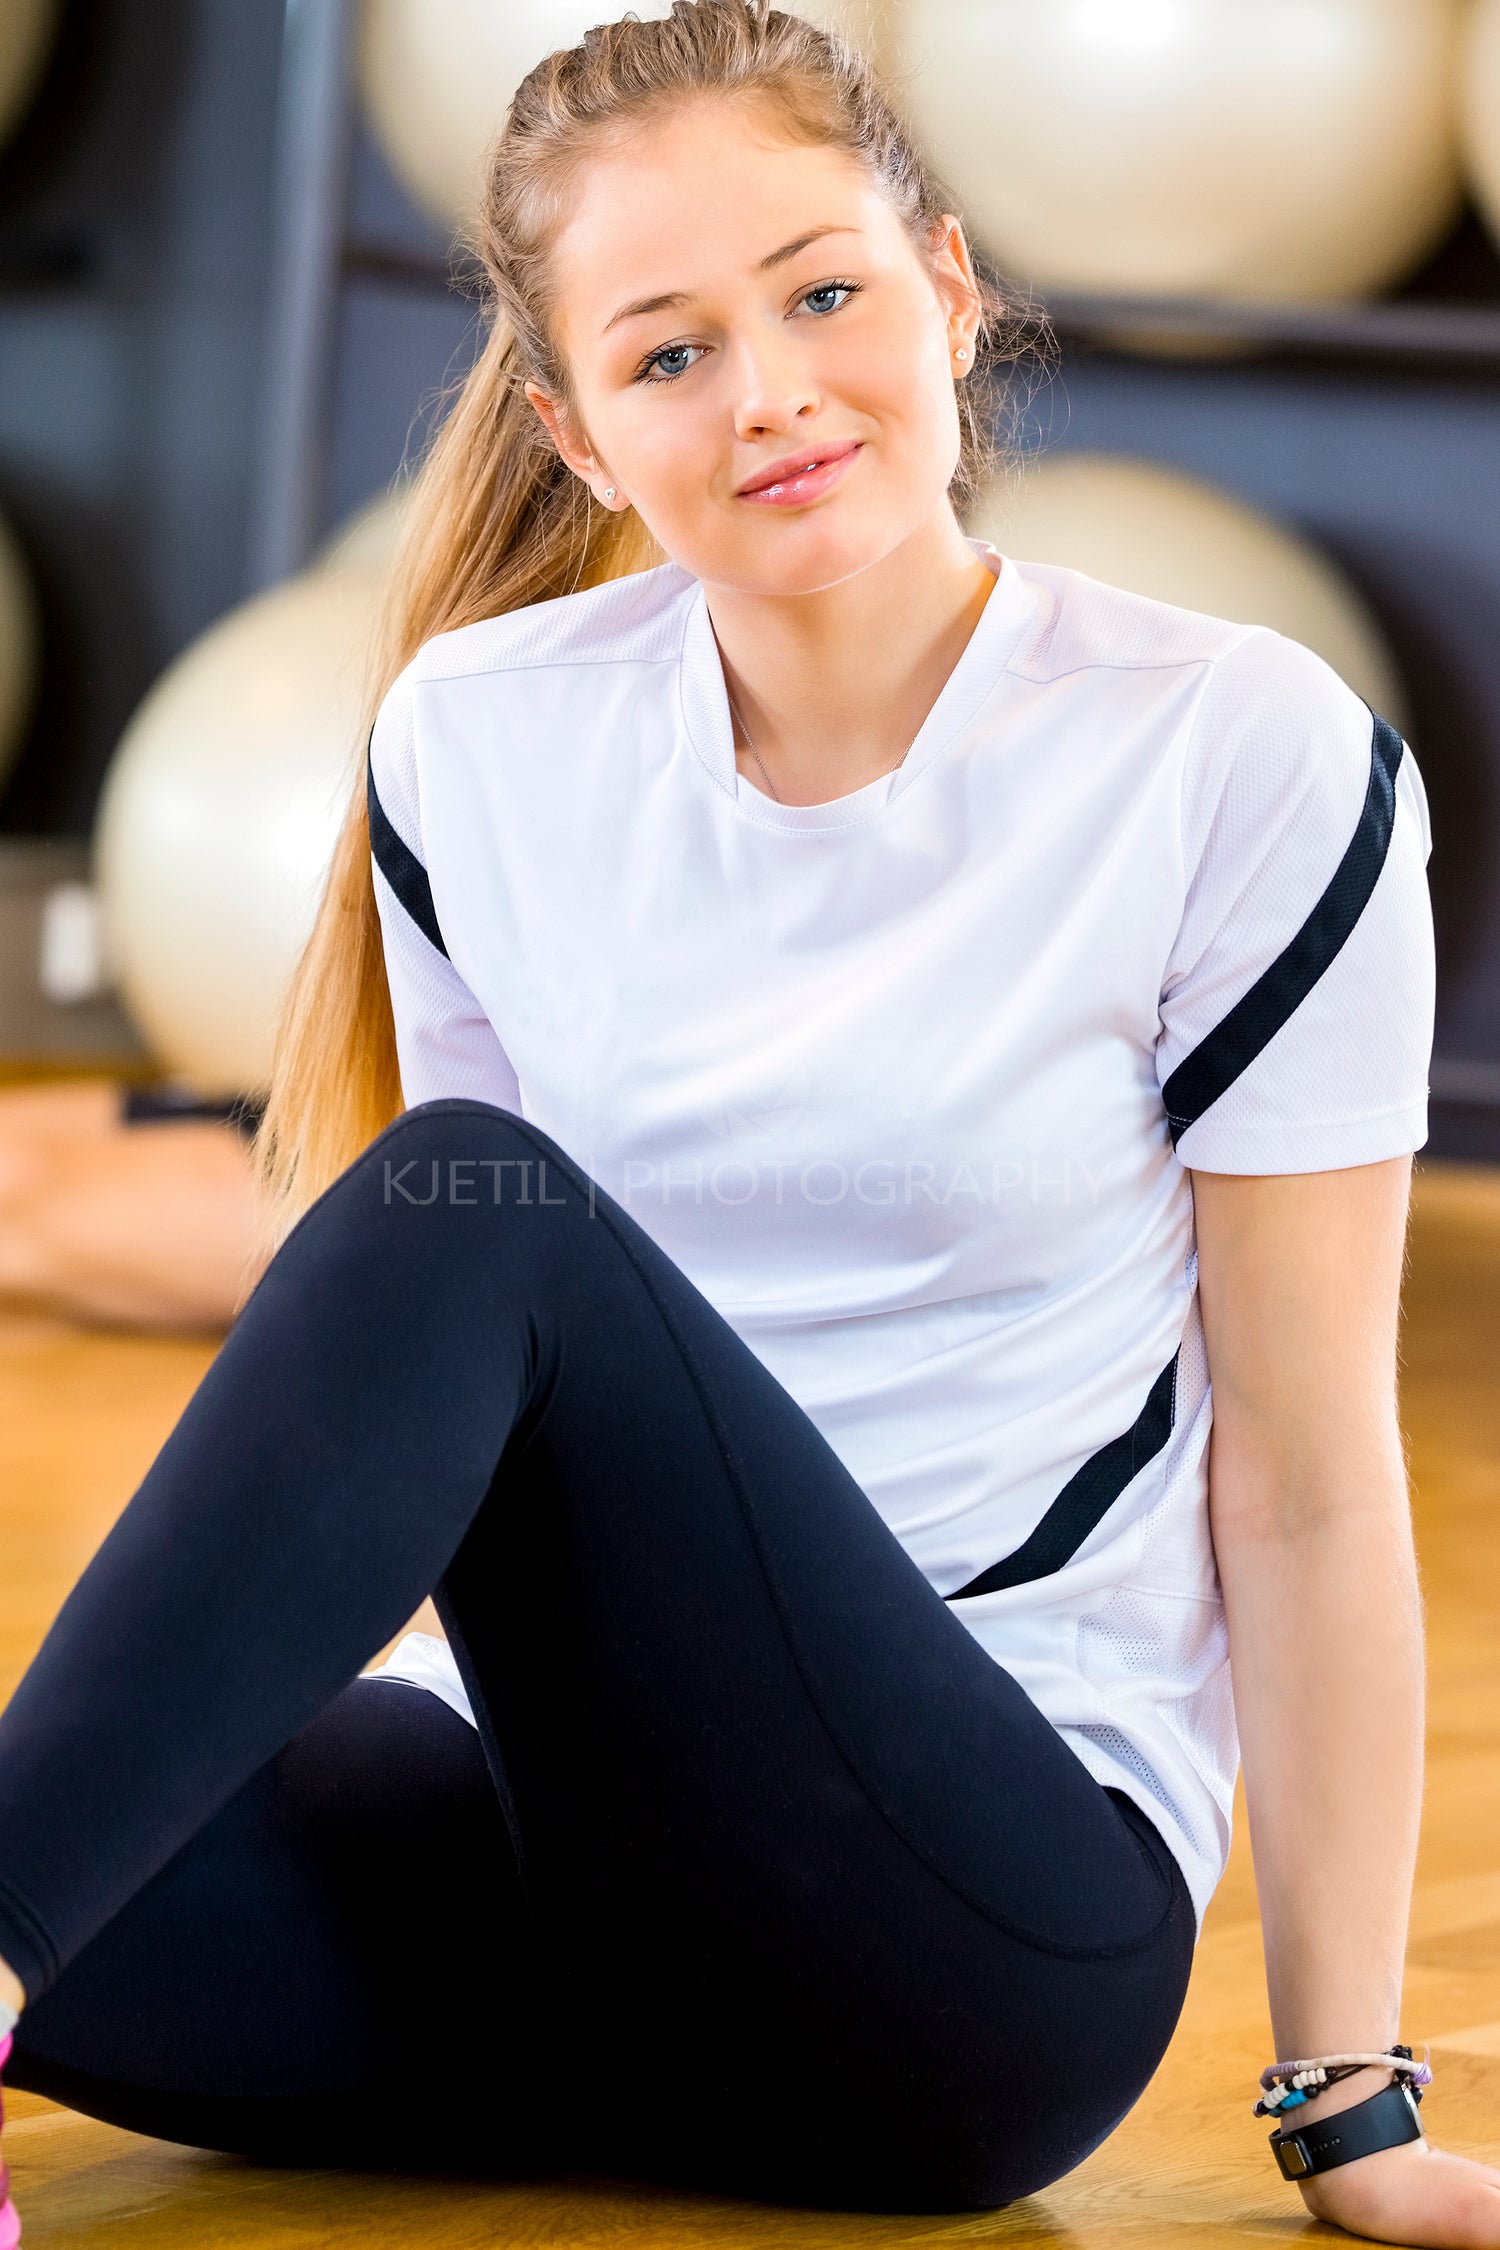 Smiling young woman in workout outfit at the fitness gym